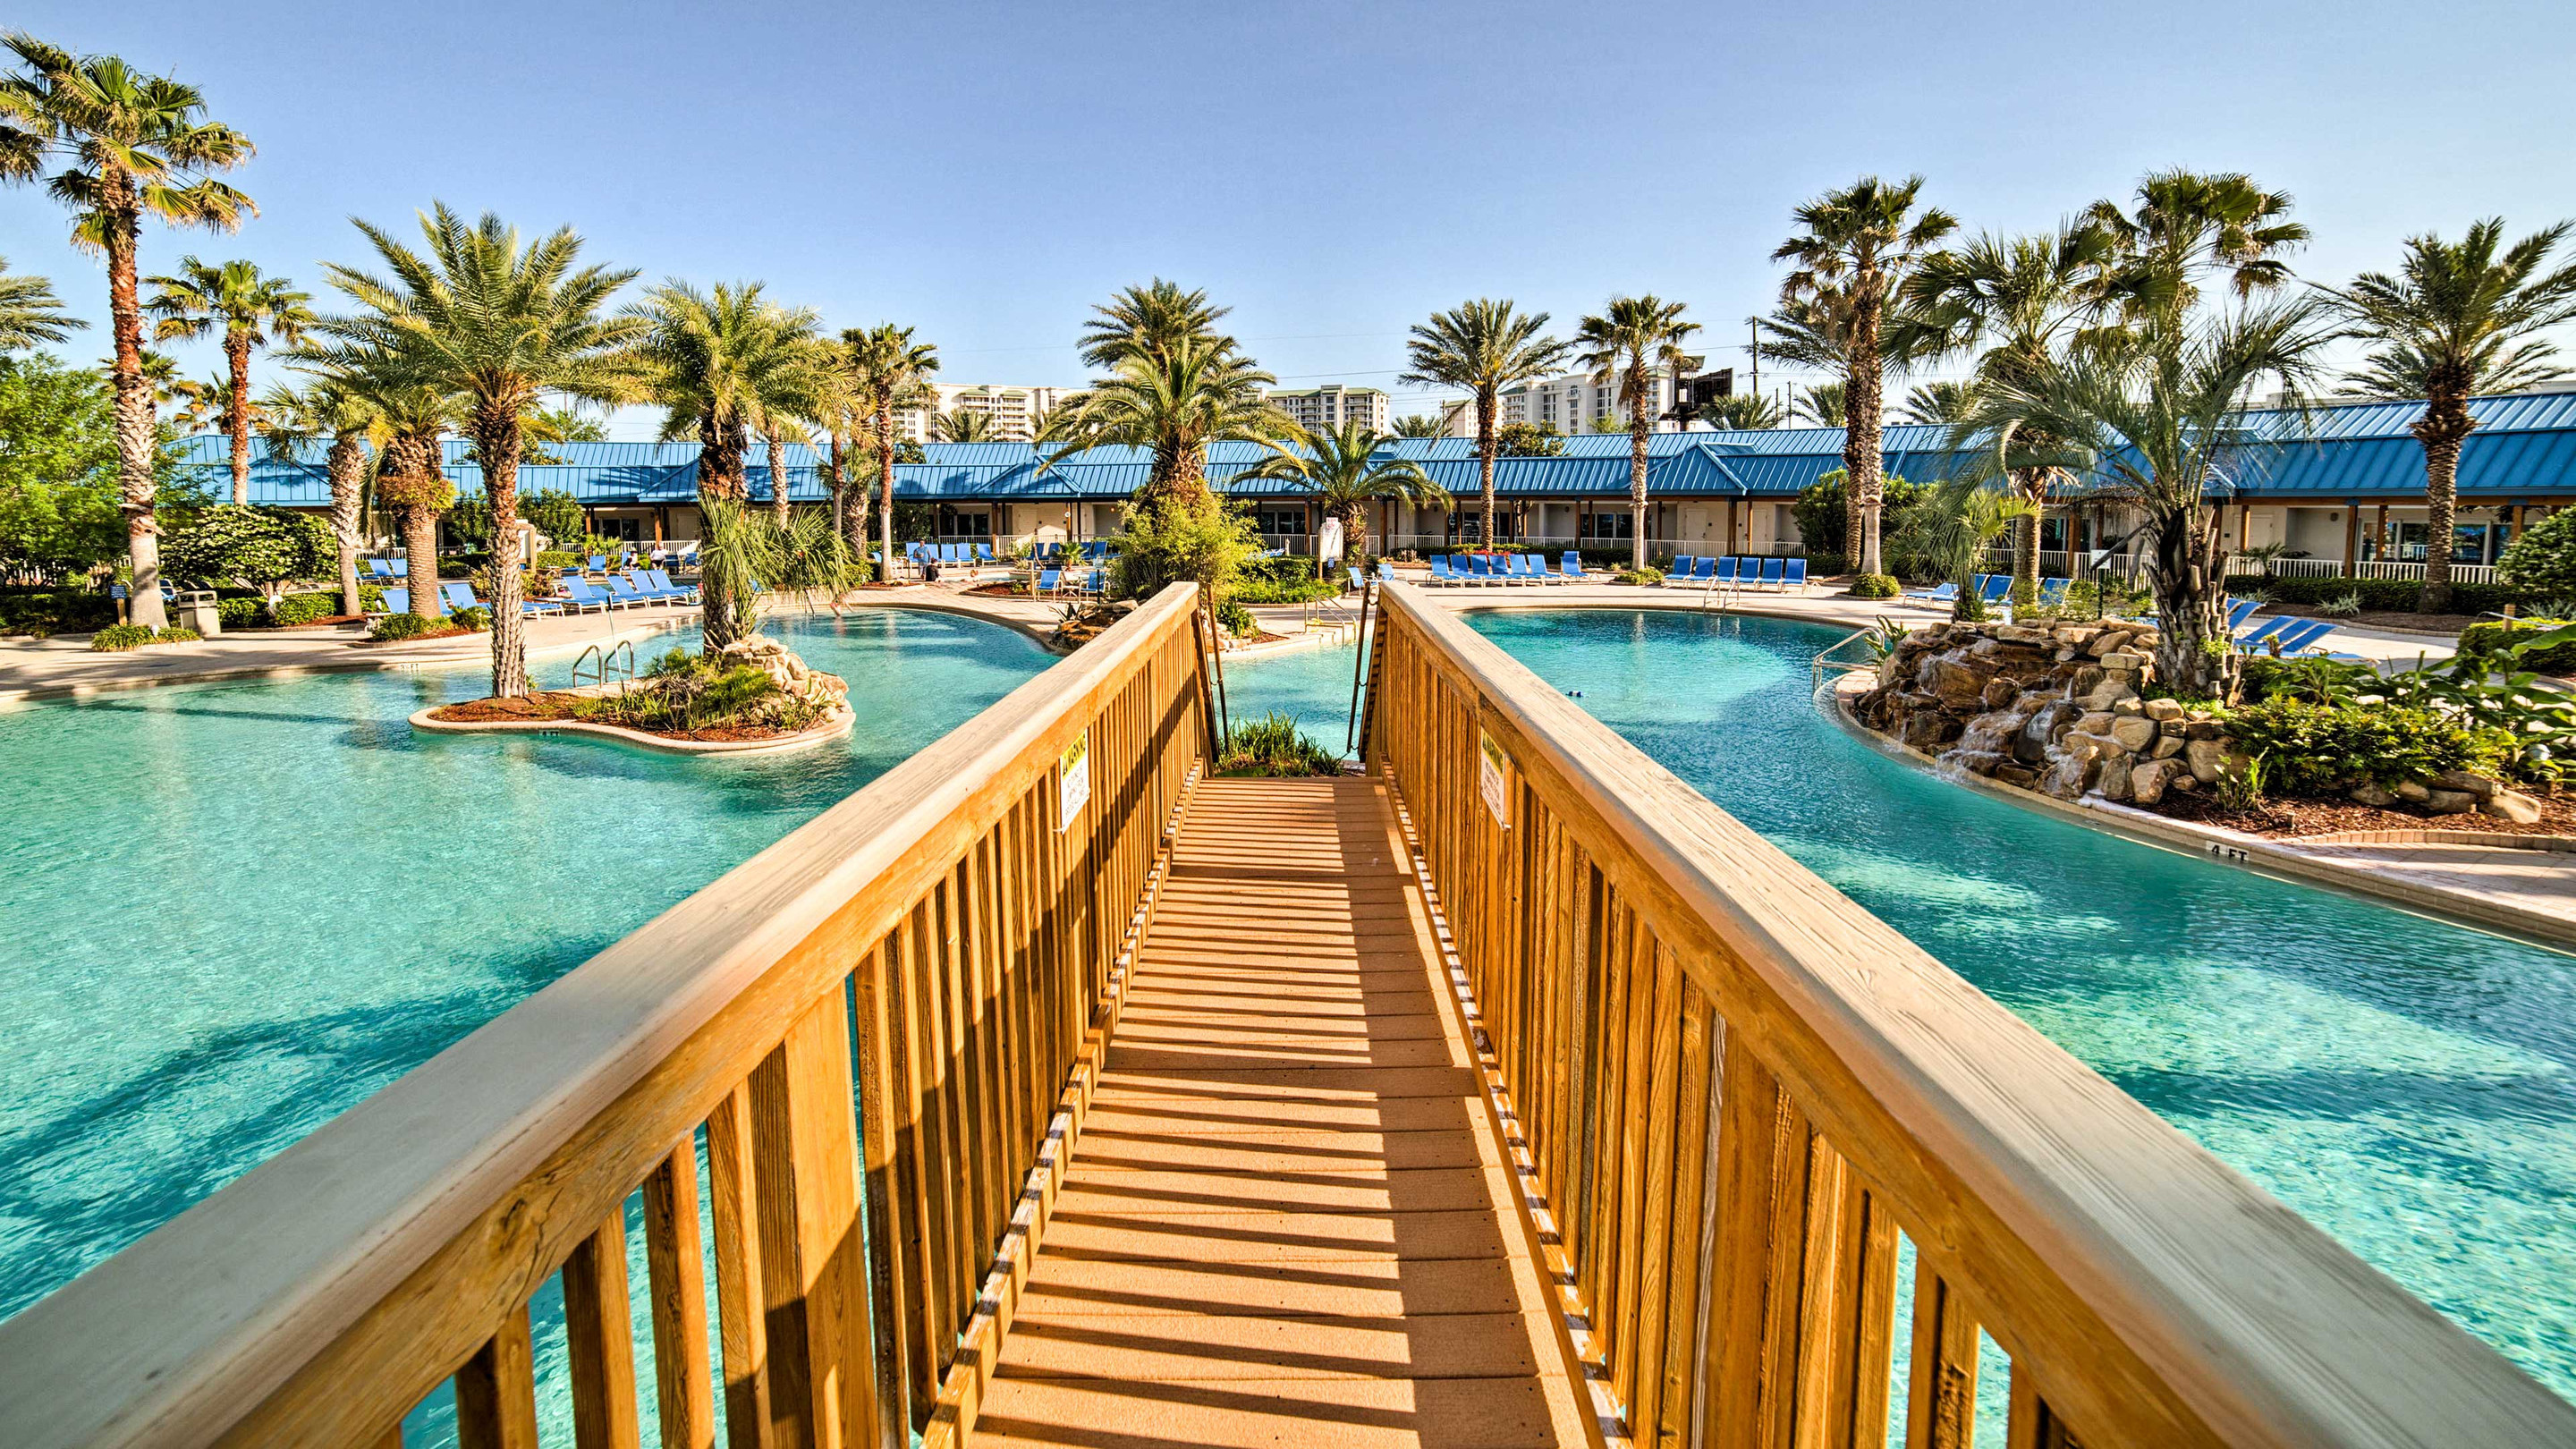 A Vacation Condo Rental In Destin With A Lagoon Pool And A Wooden Bridge 